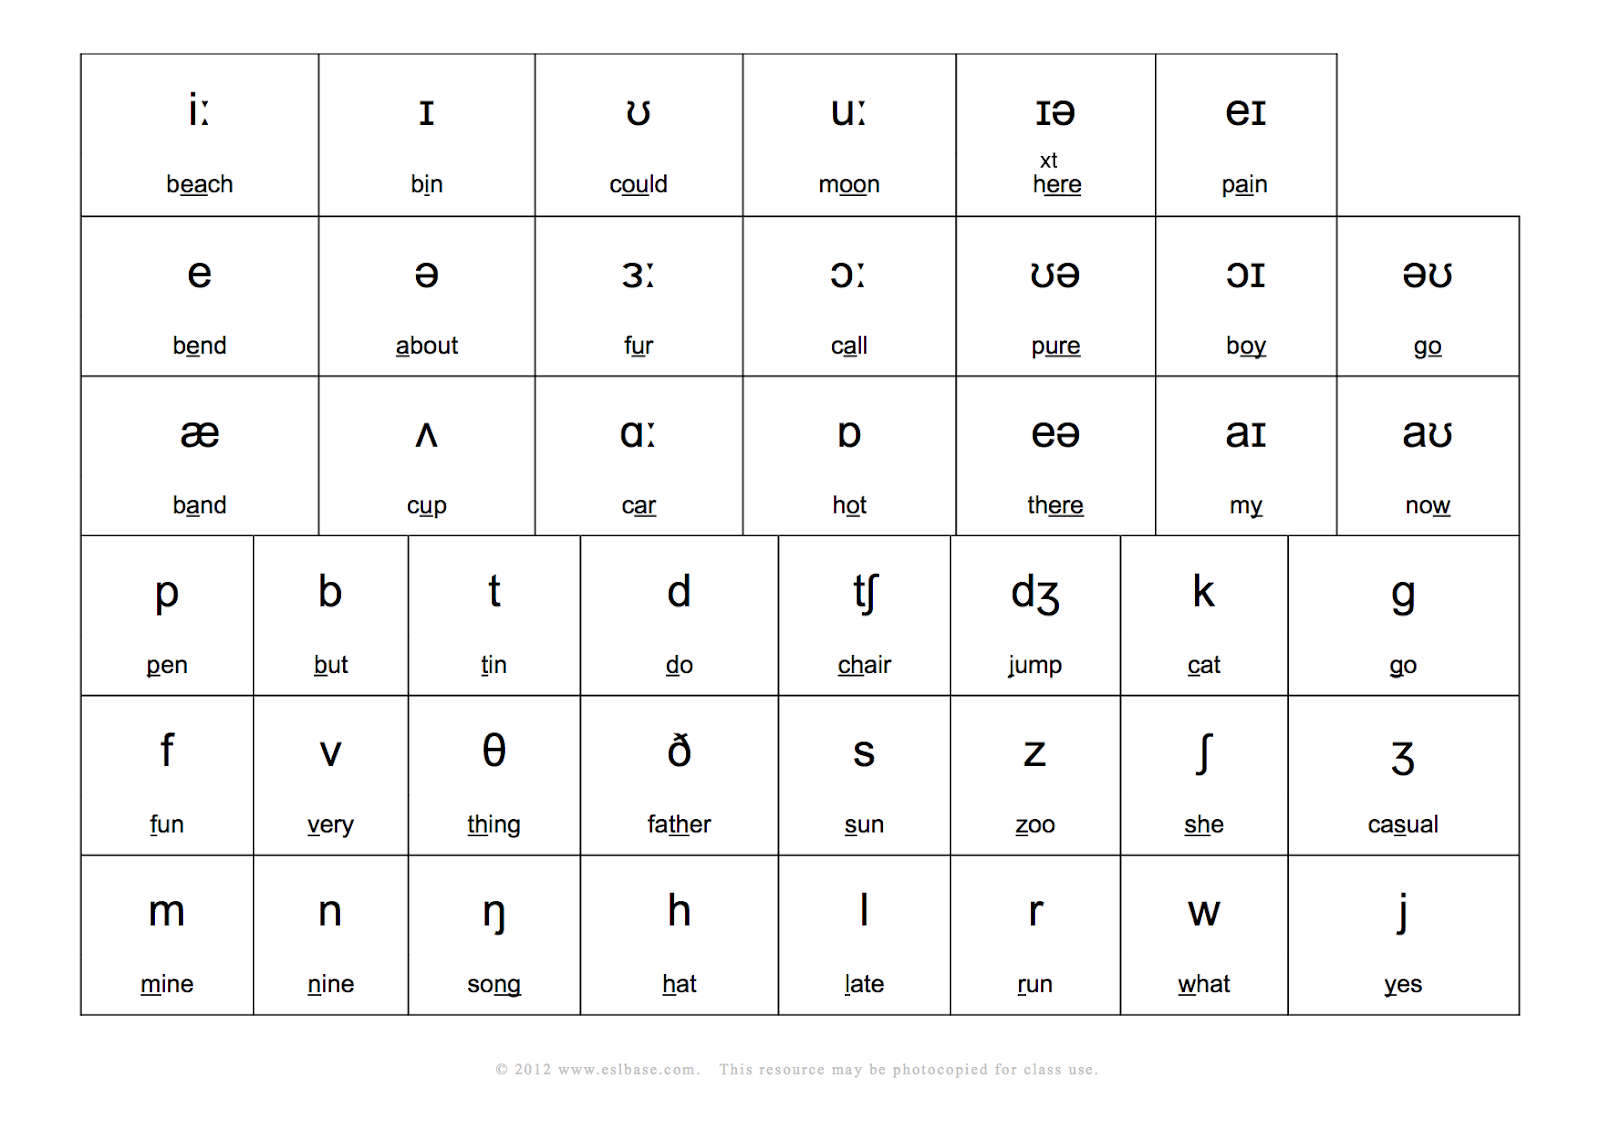 The World in English: Phonemic chart